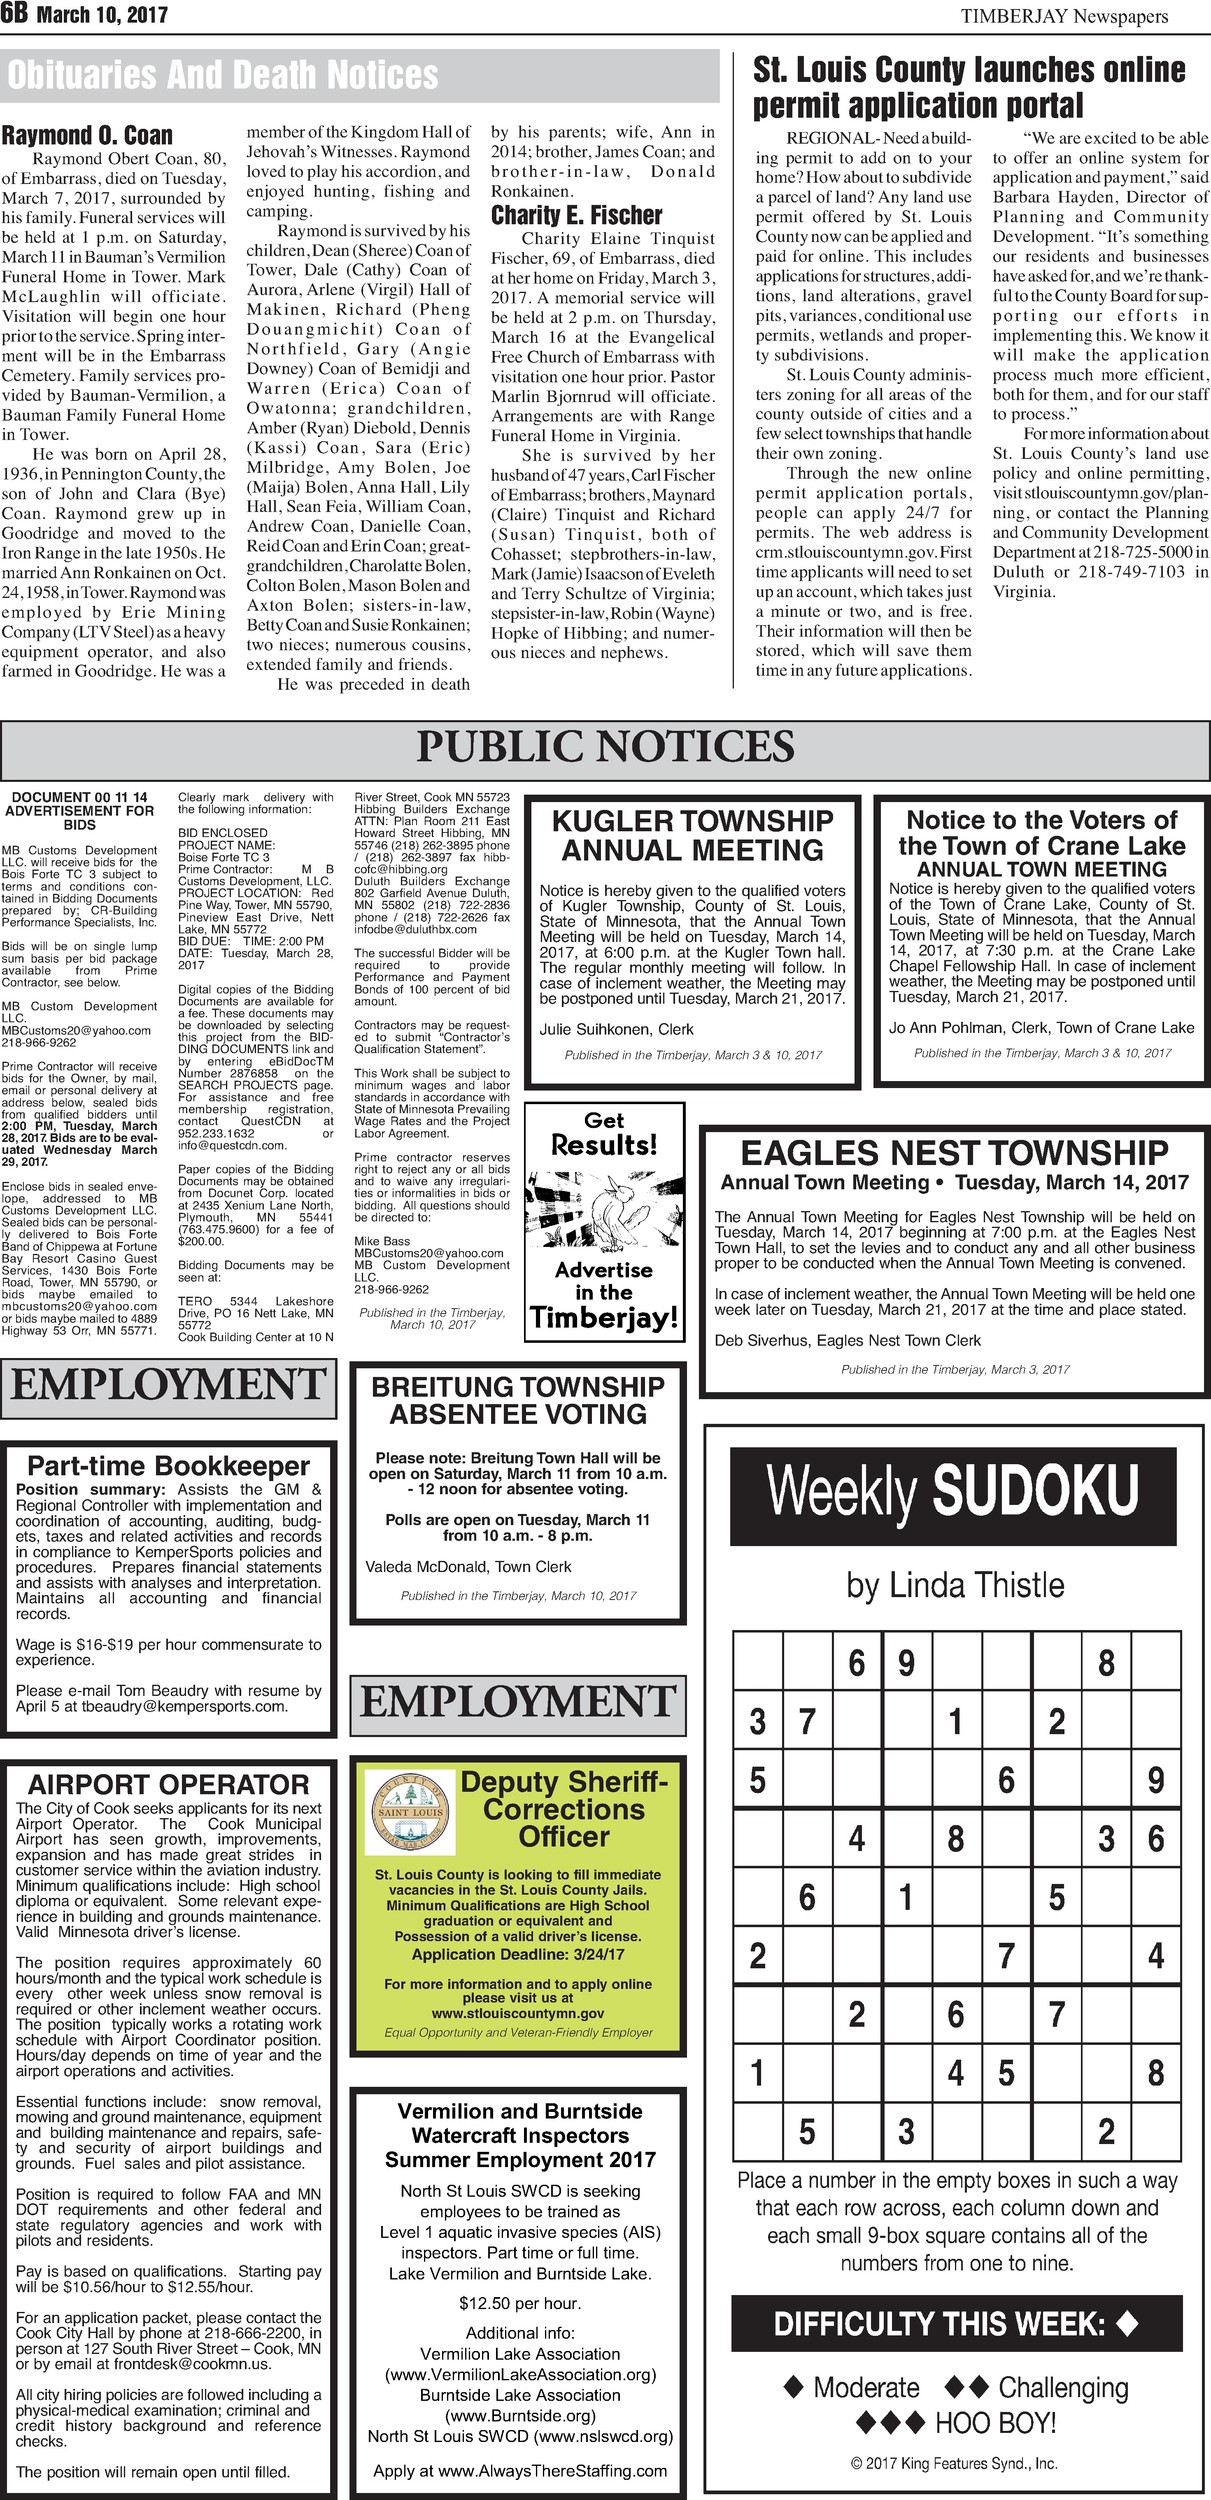 Click here to view the legal notices and classifieds on page 6B